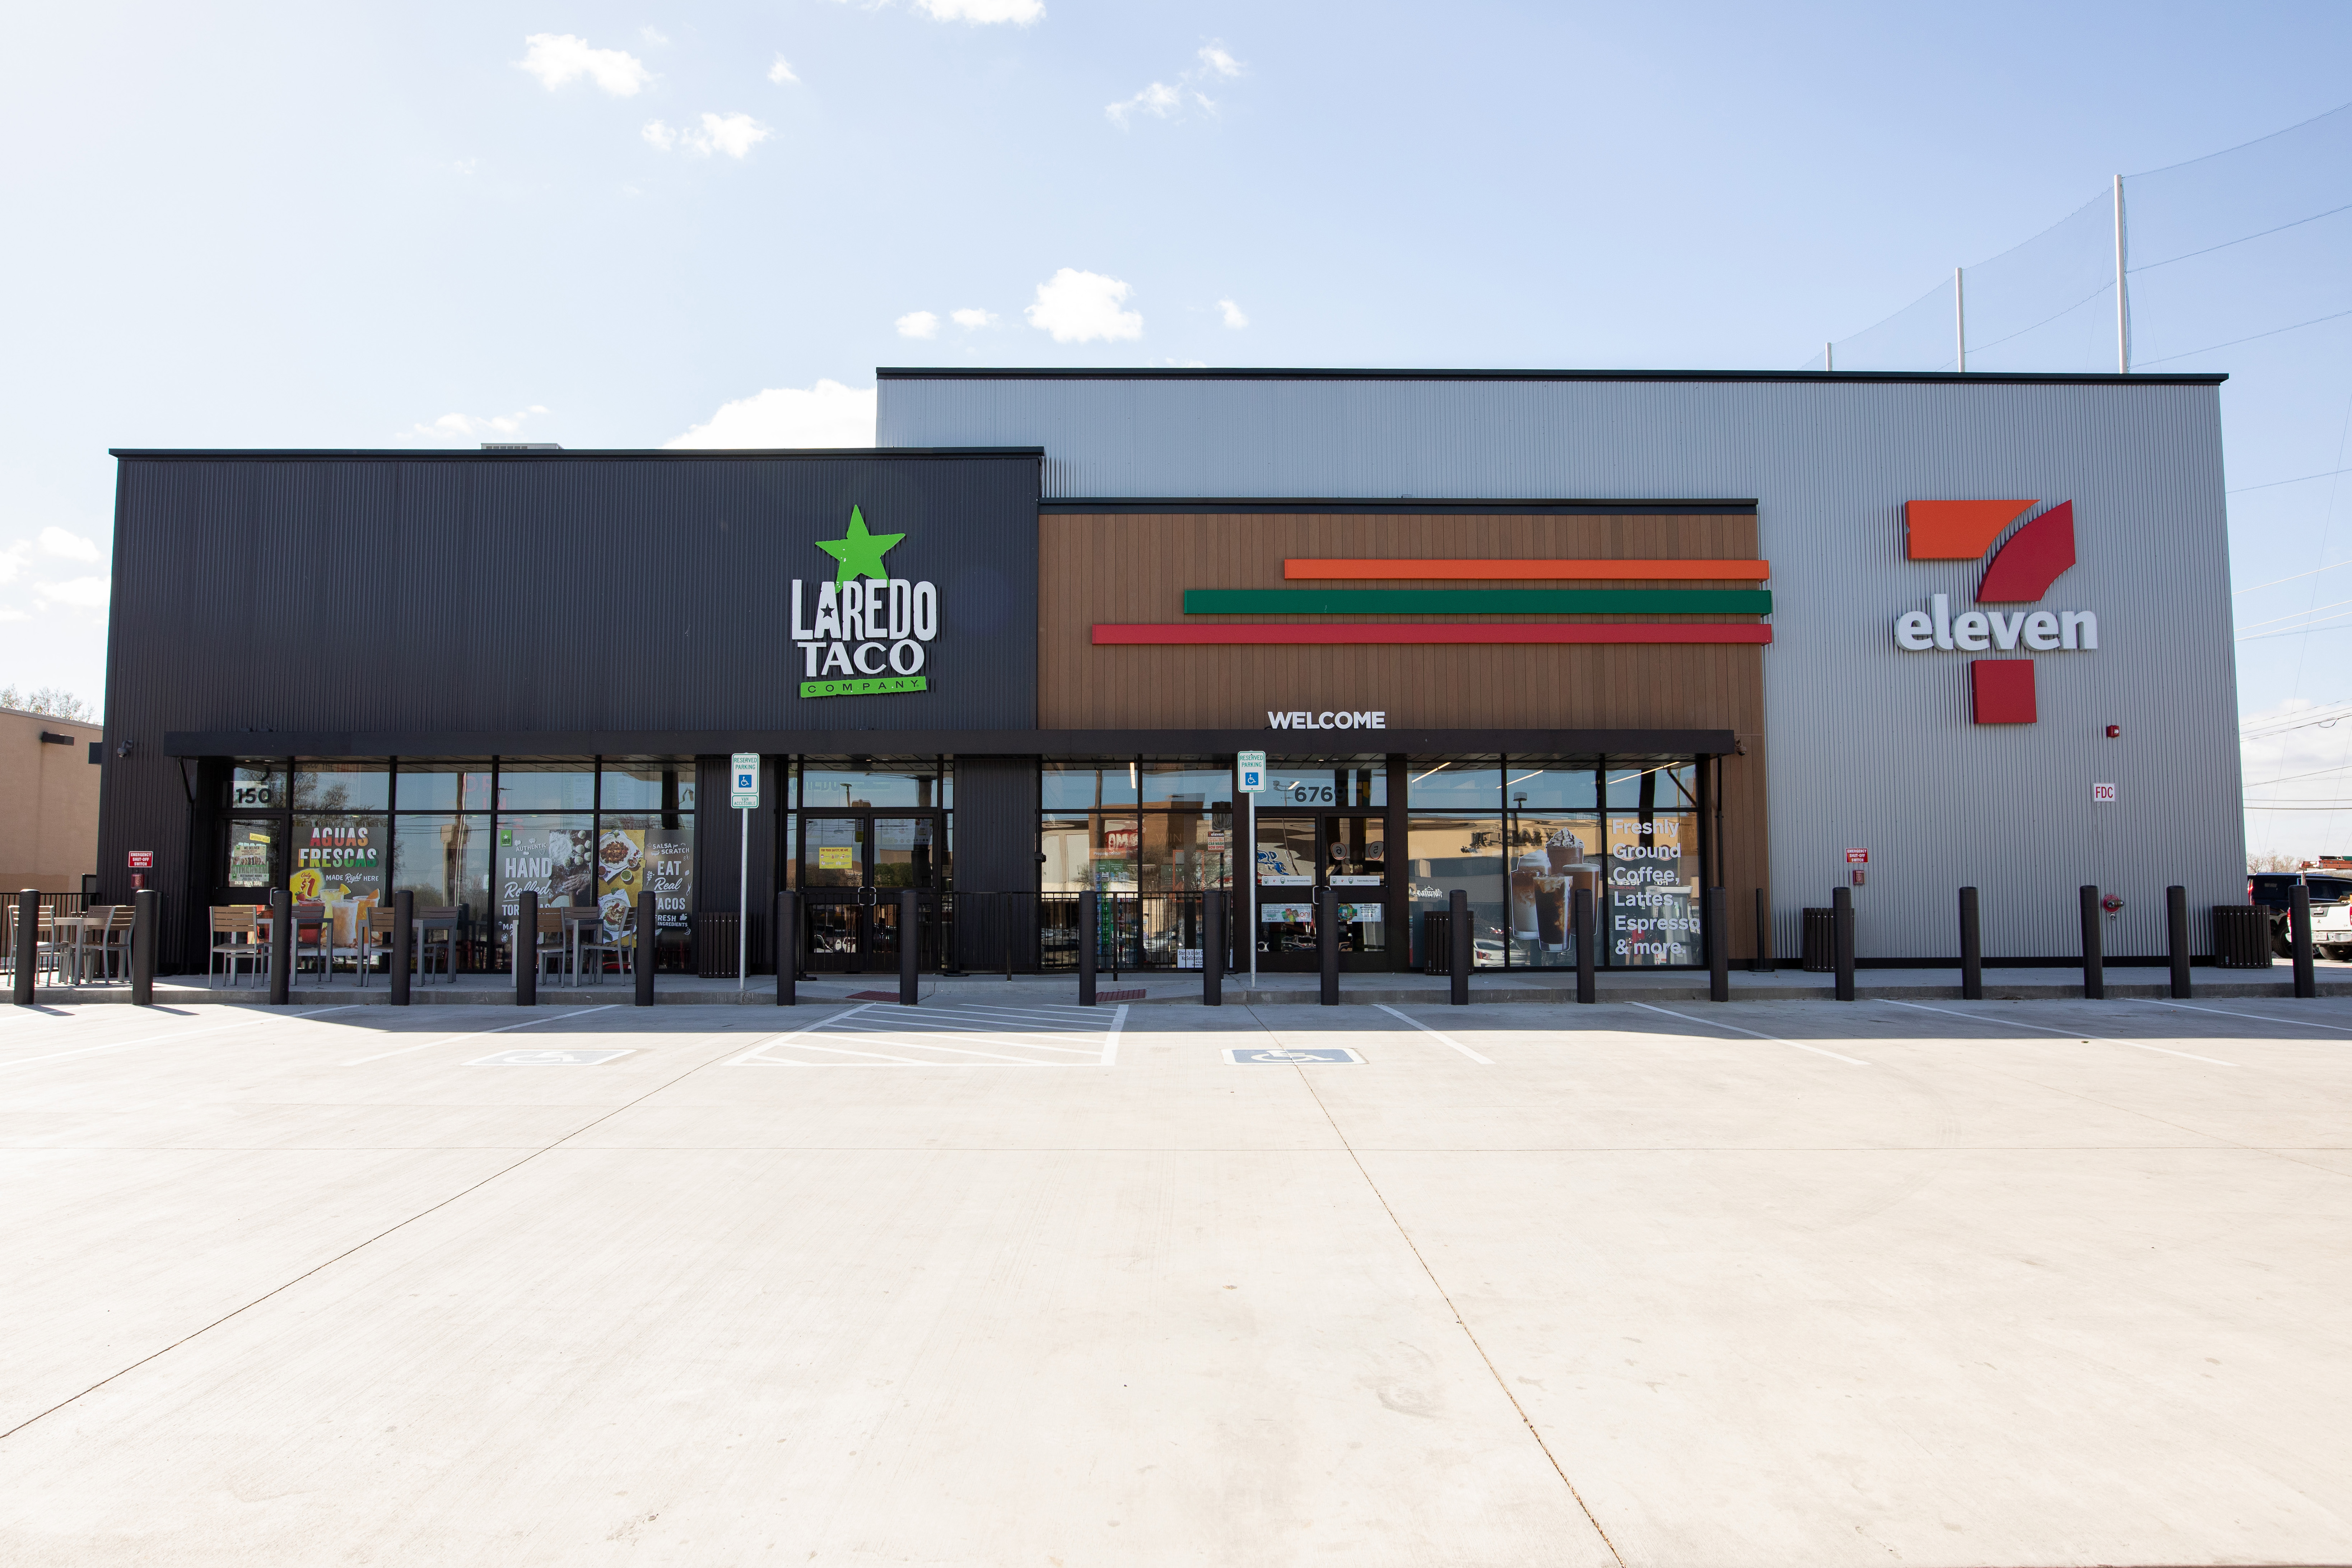 A  7-Eleven "evolution store" where the Irving-based retailer is testing new ideas.